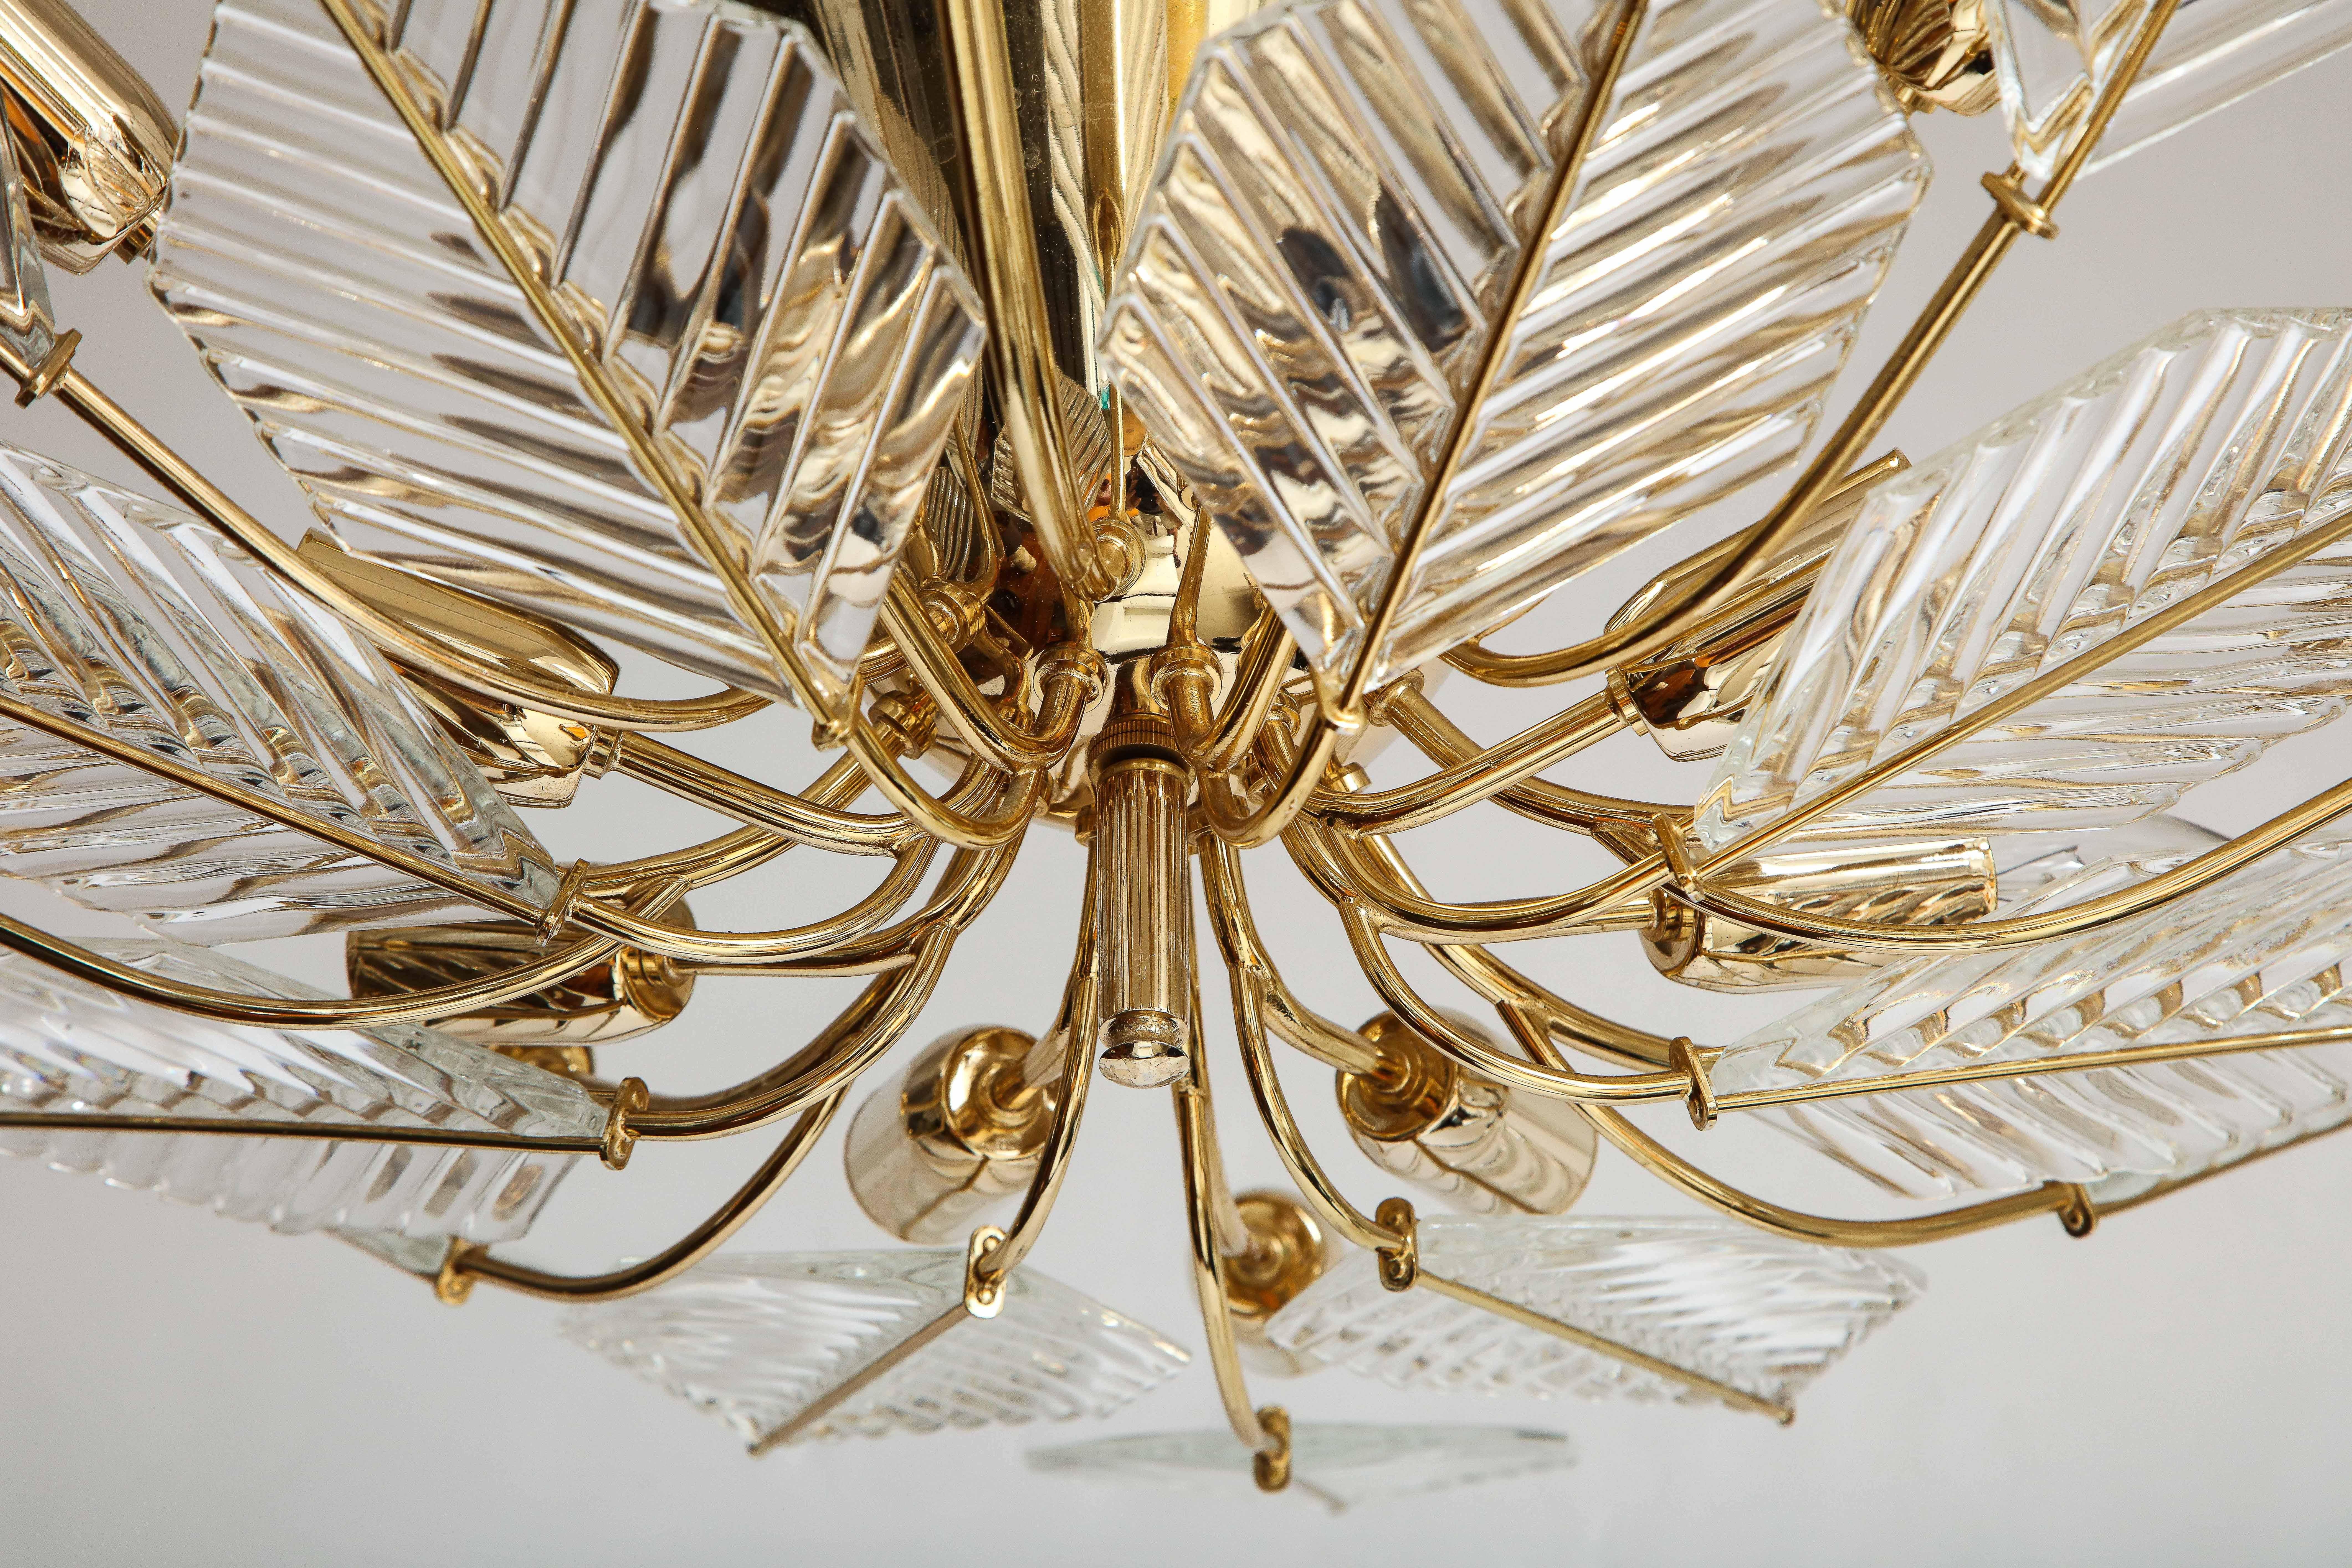 Italian 15 Light Glass Chandelier Decorated with Leaf Motif, La Murrina, 1970's For Sale 2